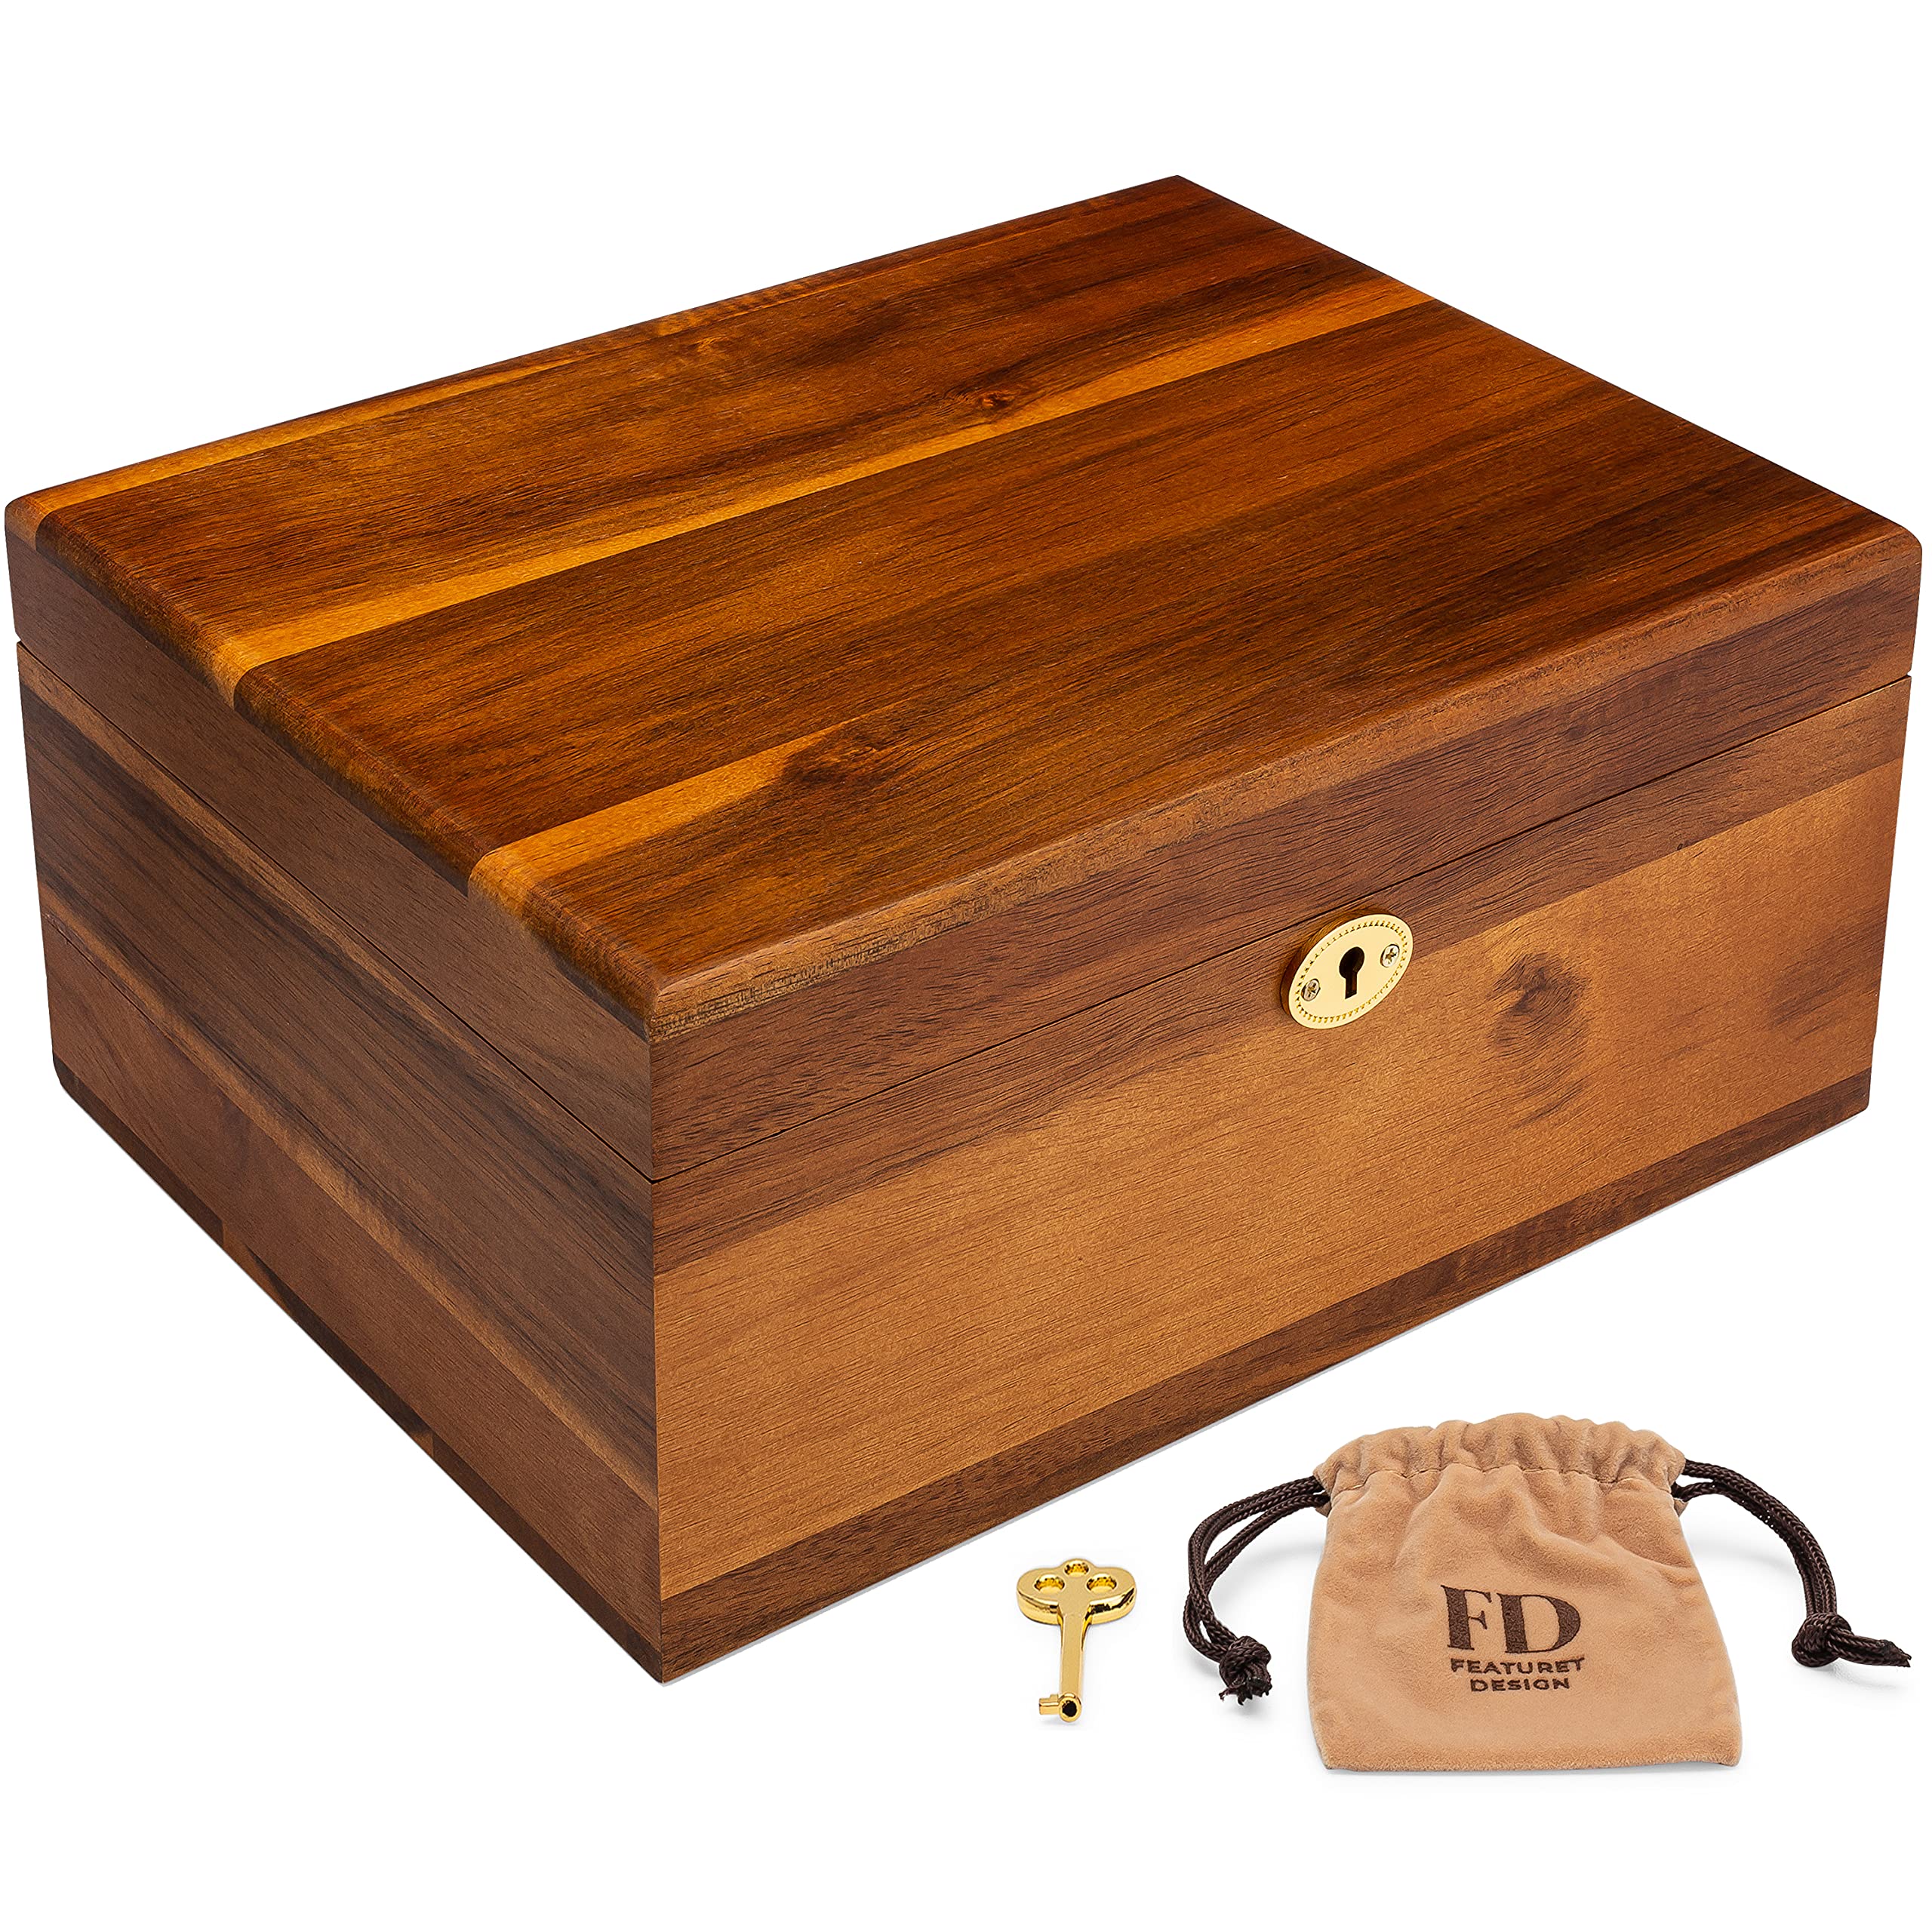 Wooden Storage Box with Hinged Lid and Locking Key - Large Premium Acacia Keepsake Chest with Matte Finish - Store Jewelry, Toys, and Keepsakes in ...